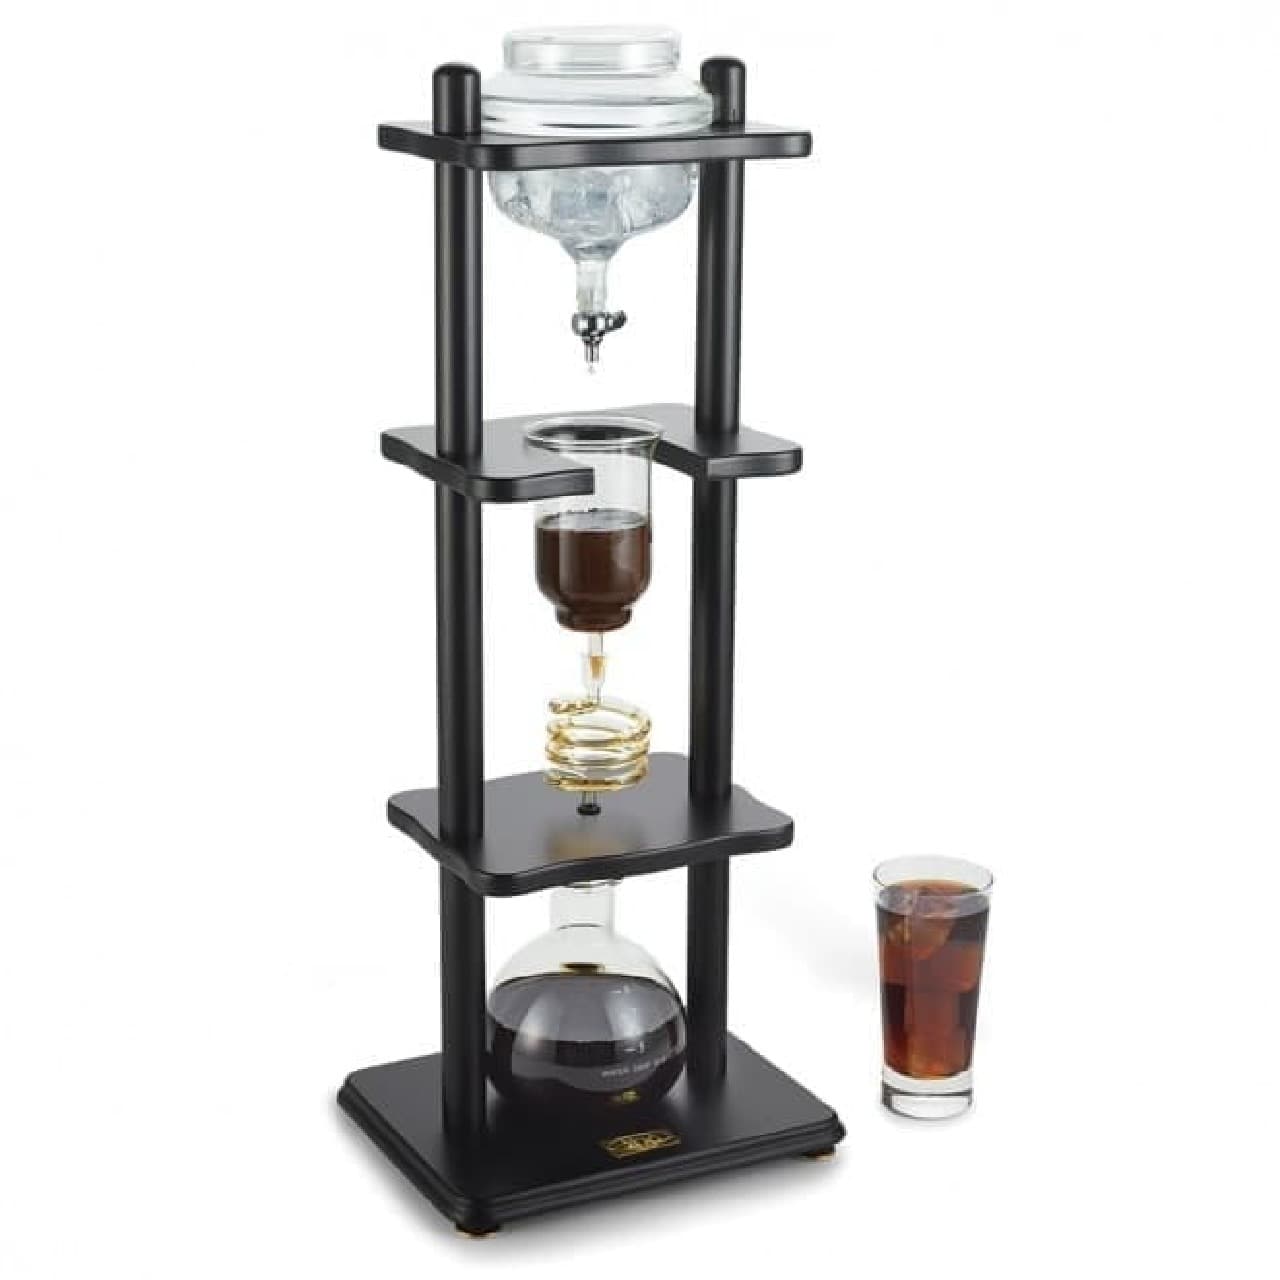 Coffee dripper "Flavor Enhancing Coffee Extractor" with a height of 76 cm